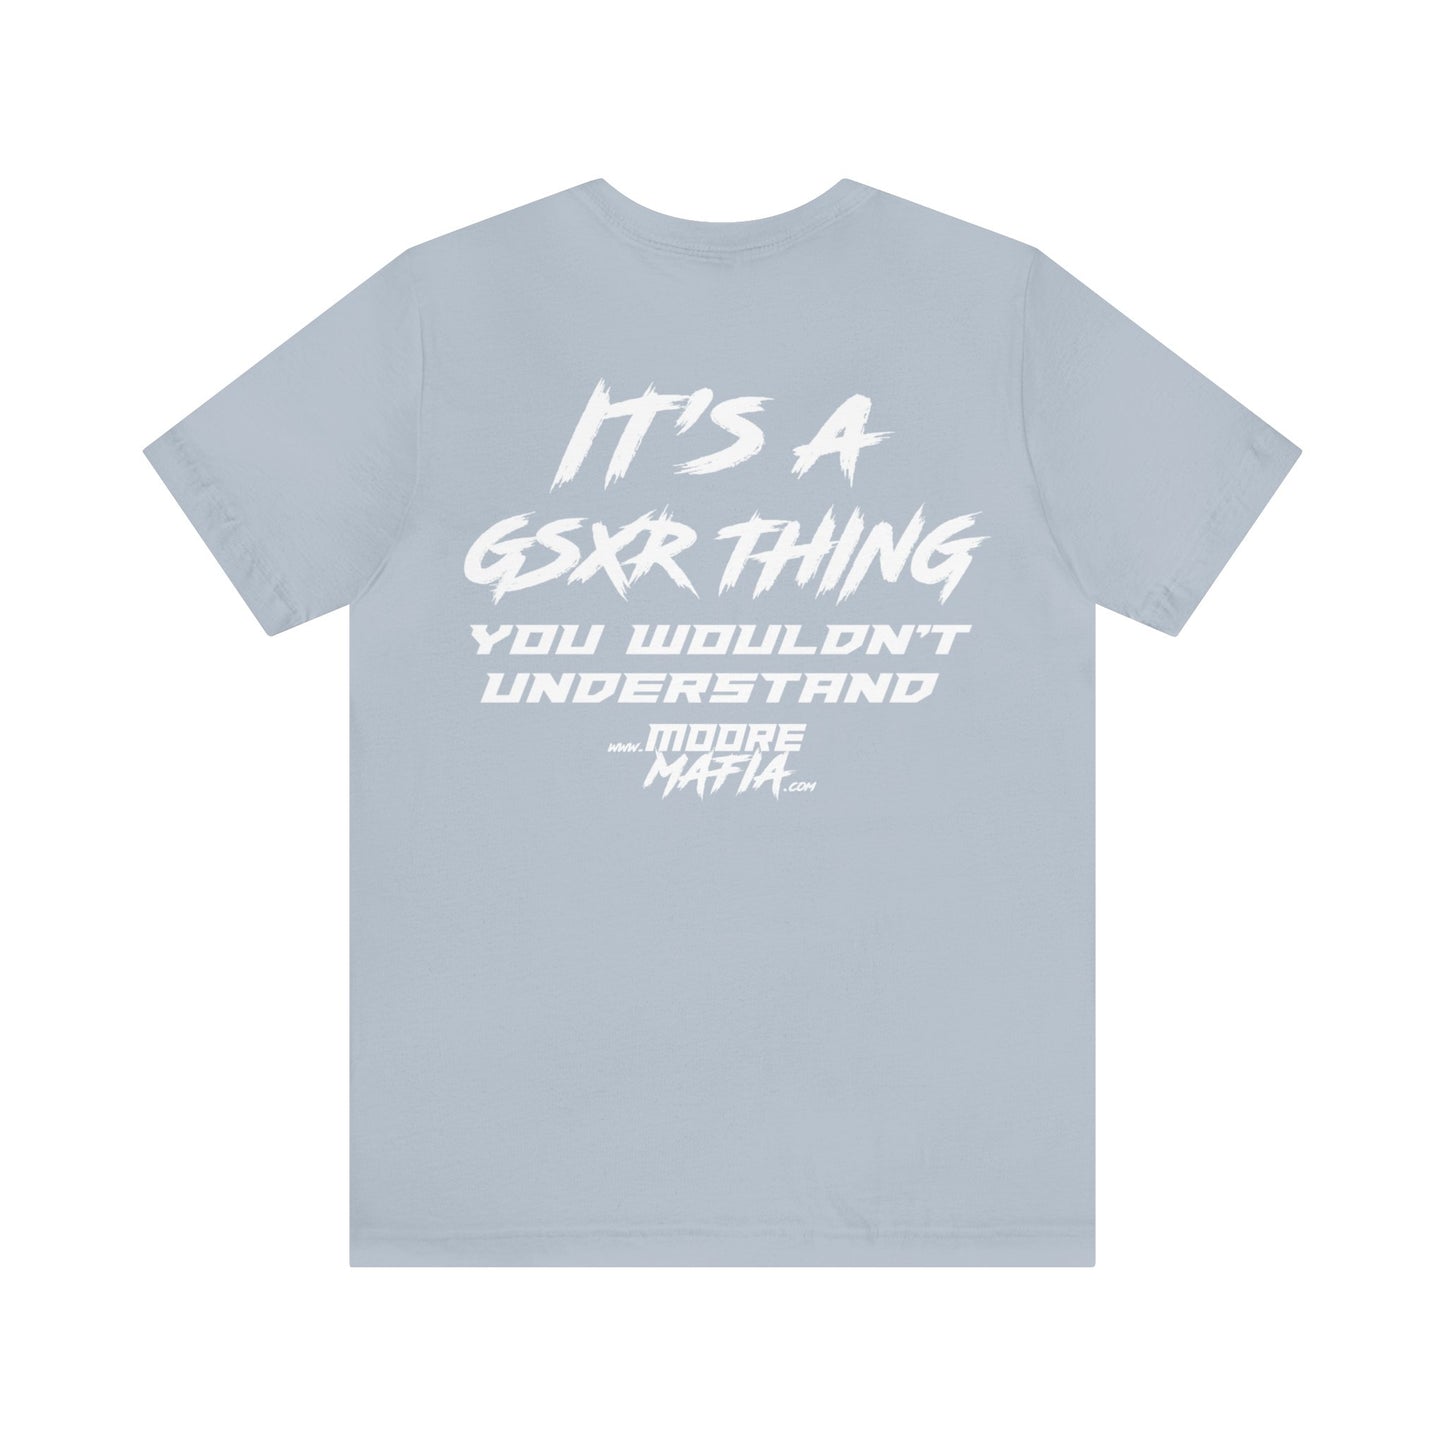 It's A GSXR Thing White Unisex T-Shirt